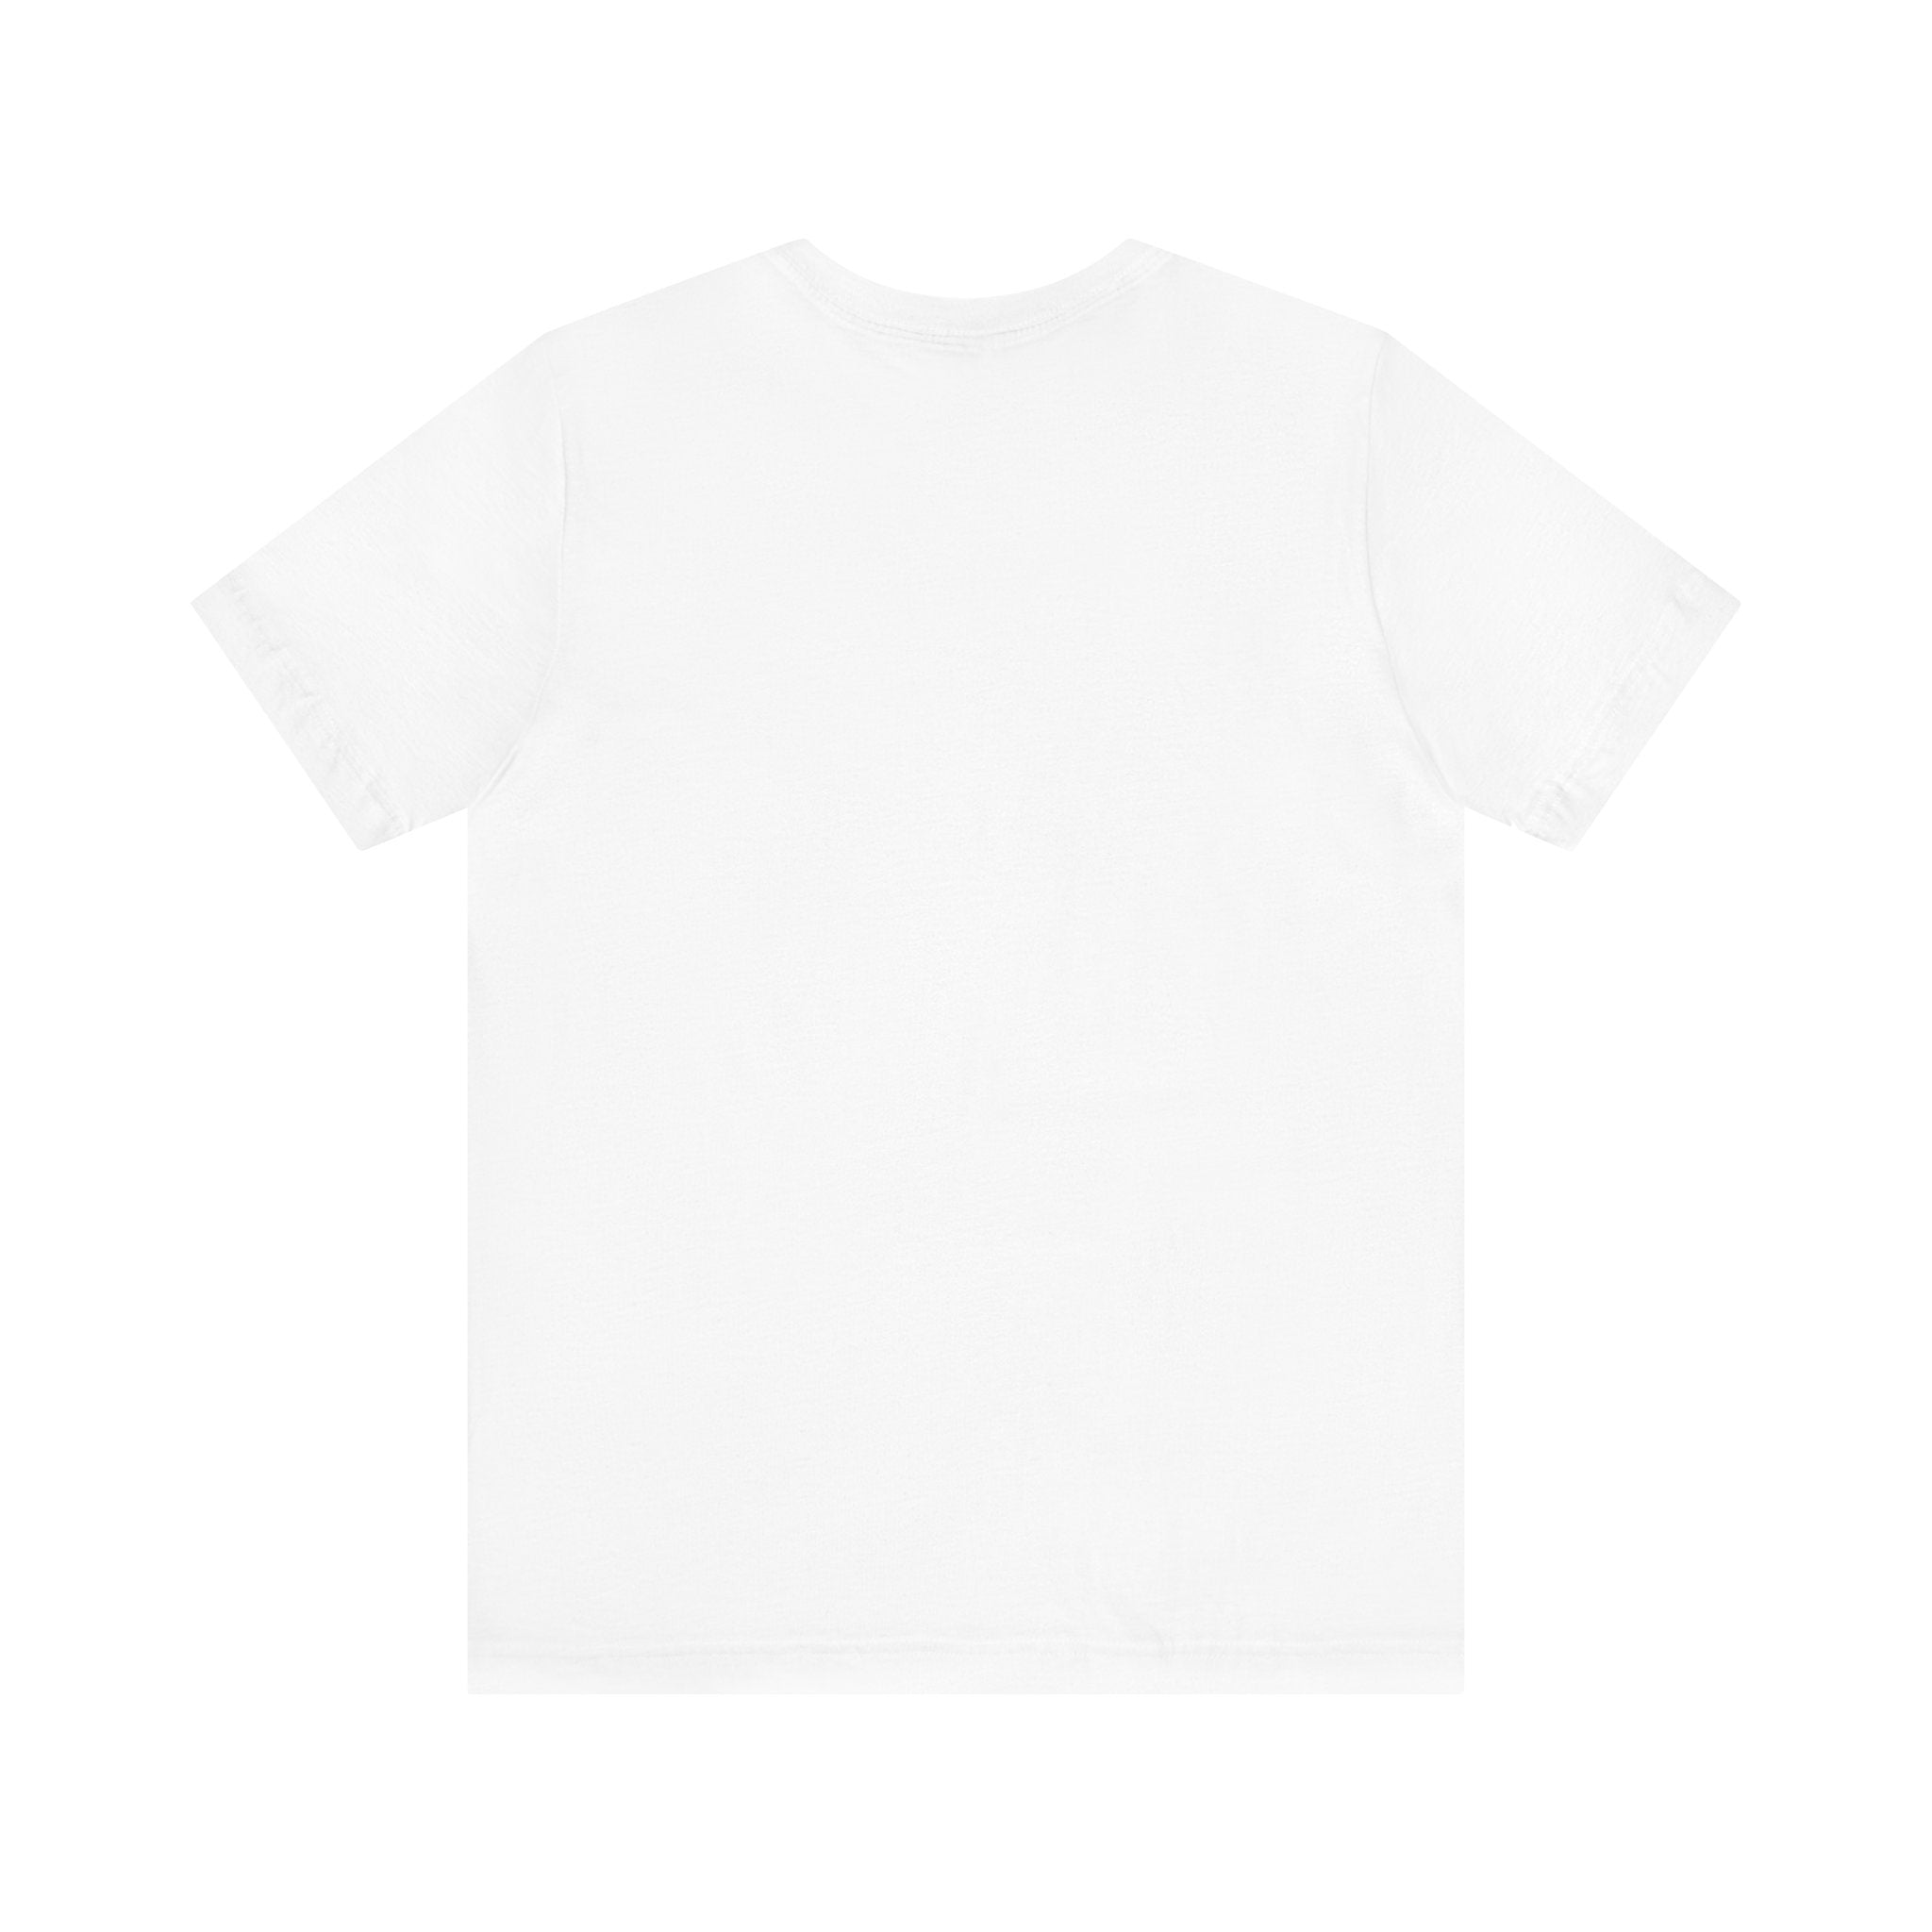 Catch the Waves - Surfing T-Shirt - Direct-to-Garment Printed White Tee